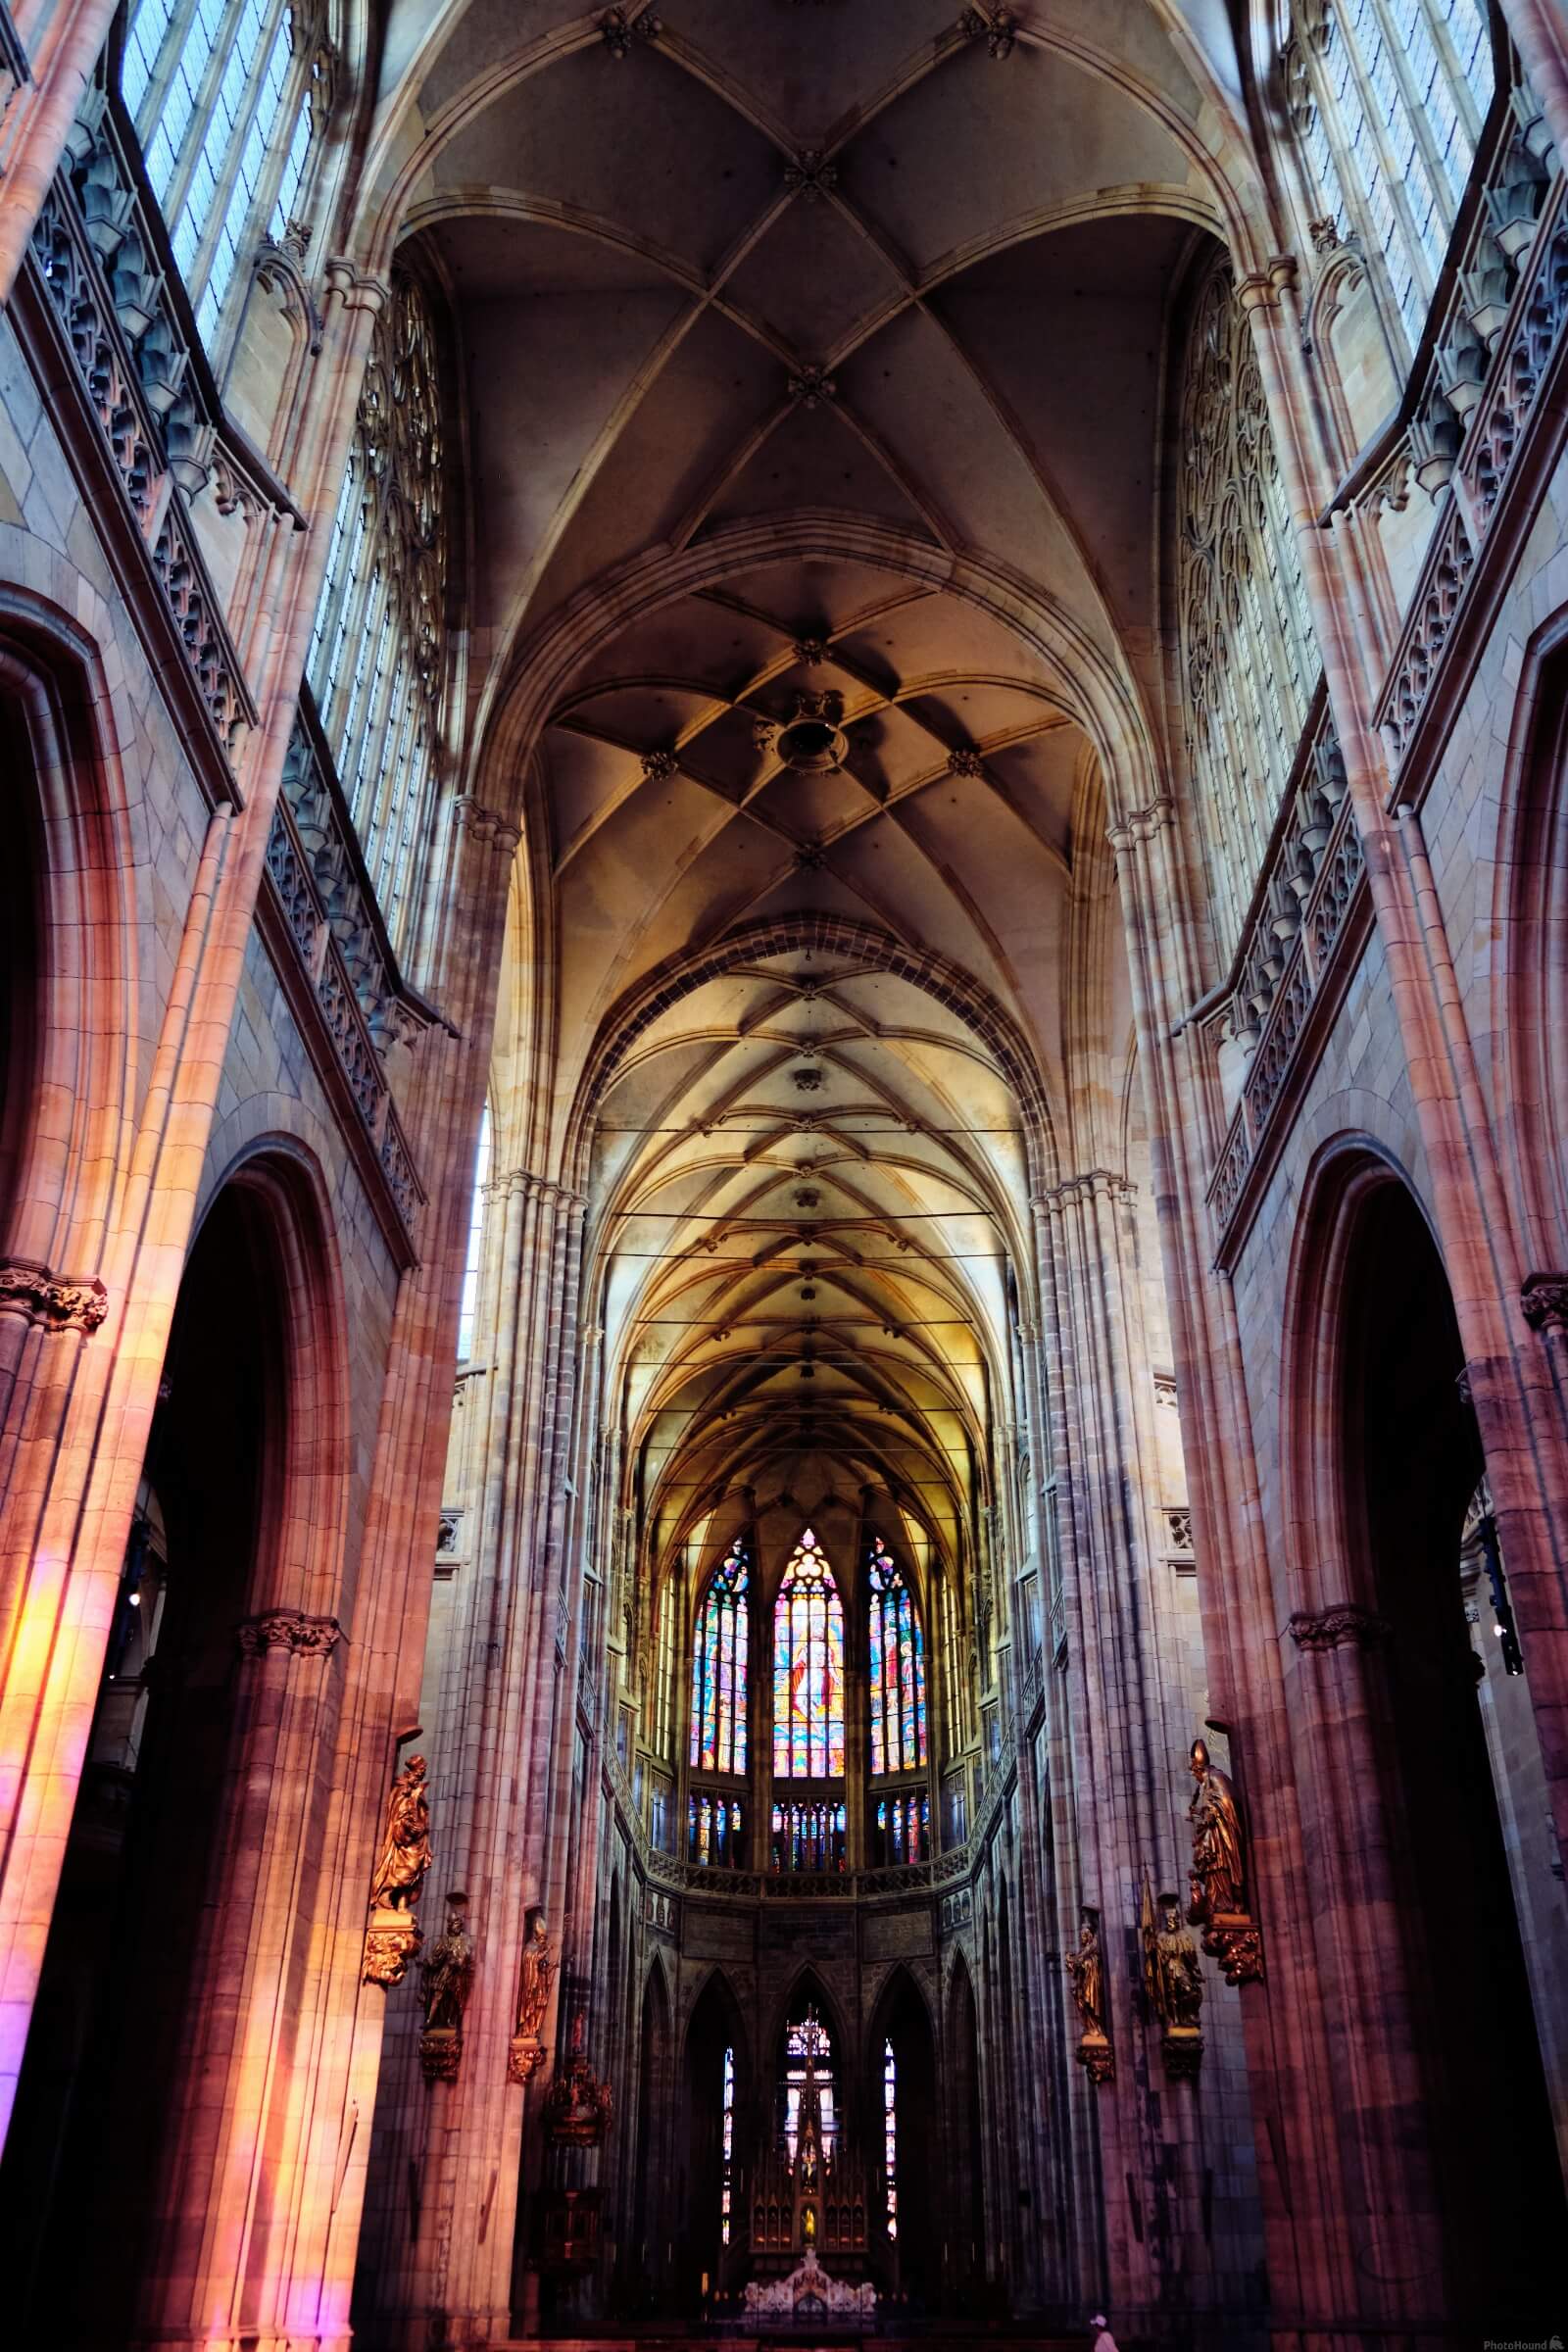 Image of St. Vitus Cathedral by Andries Jongsma